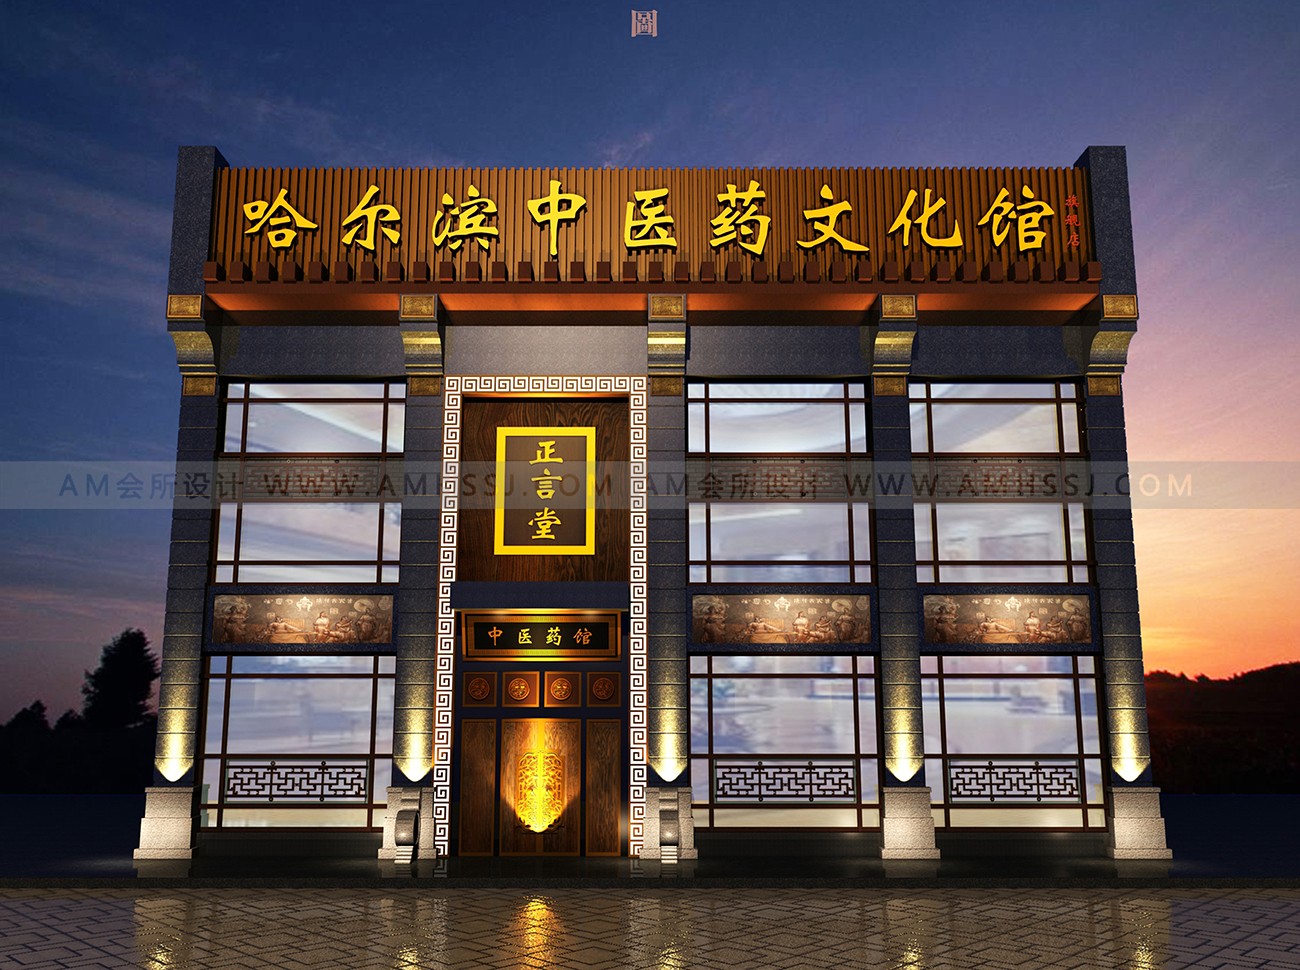 AM DESIGN | Architectural exterior design of Harbin Traditional Chinese Medicine Cultural Center Building